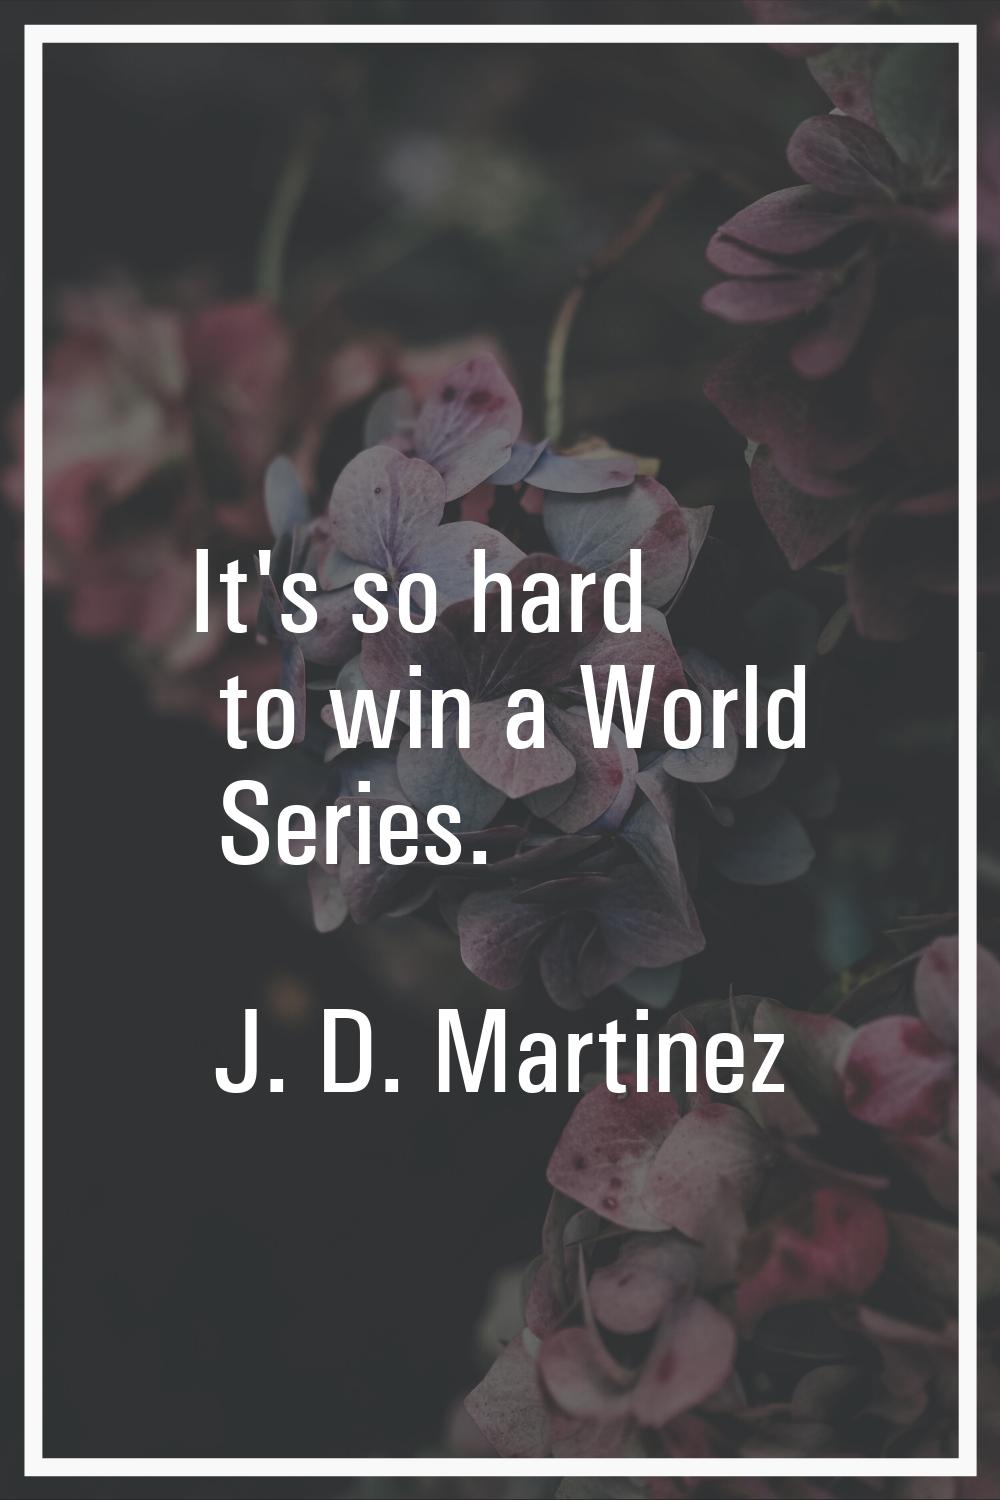 It's so hard to win a World Series.